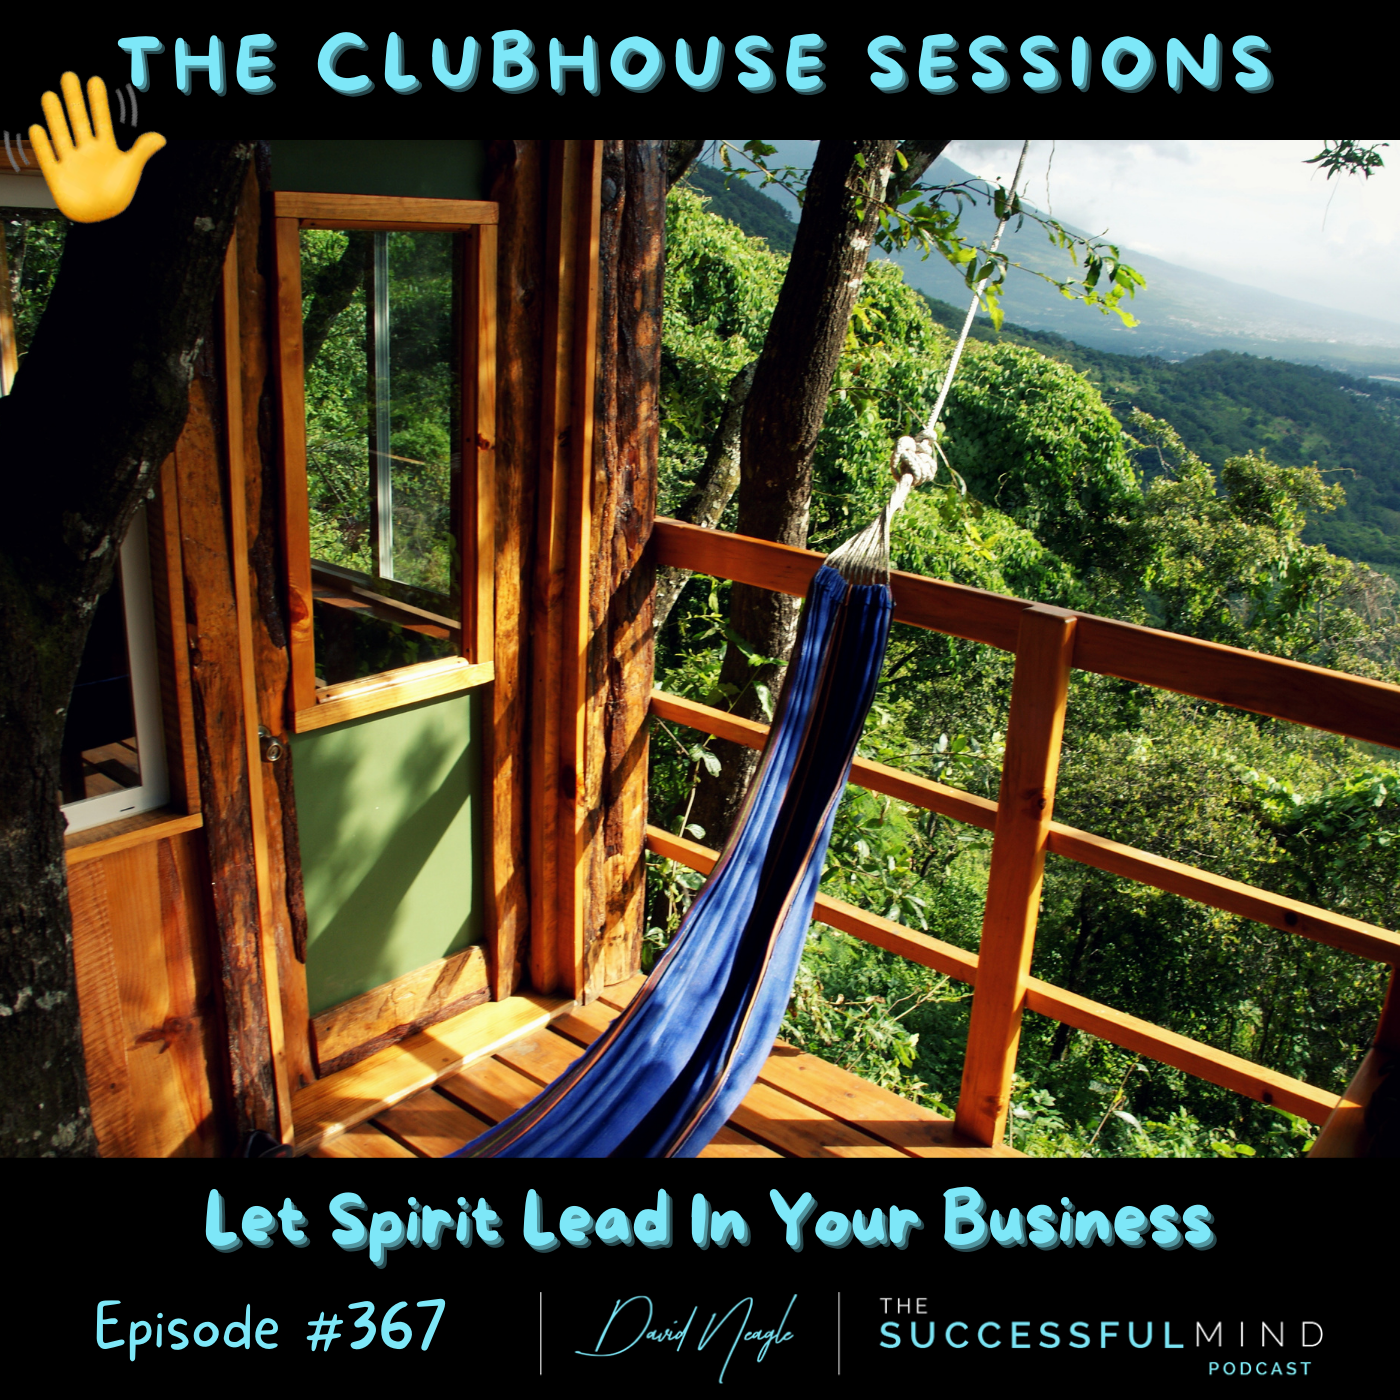 The Clubhouse Sessions - Let Spirit Lead in Your Business